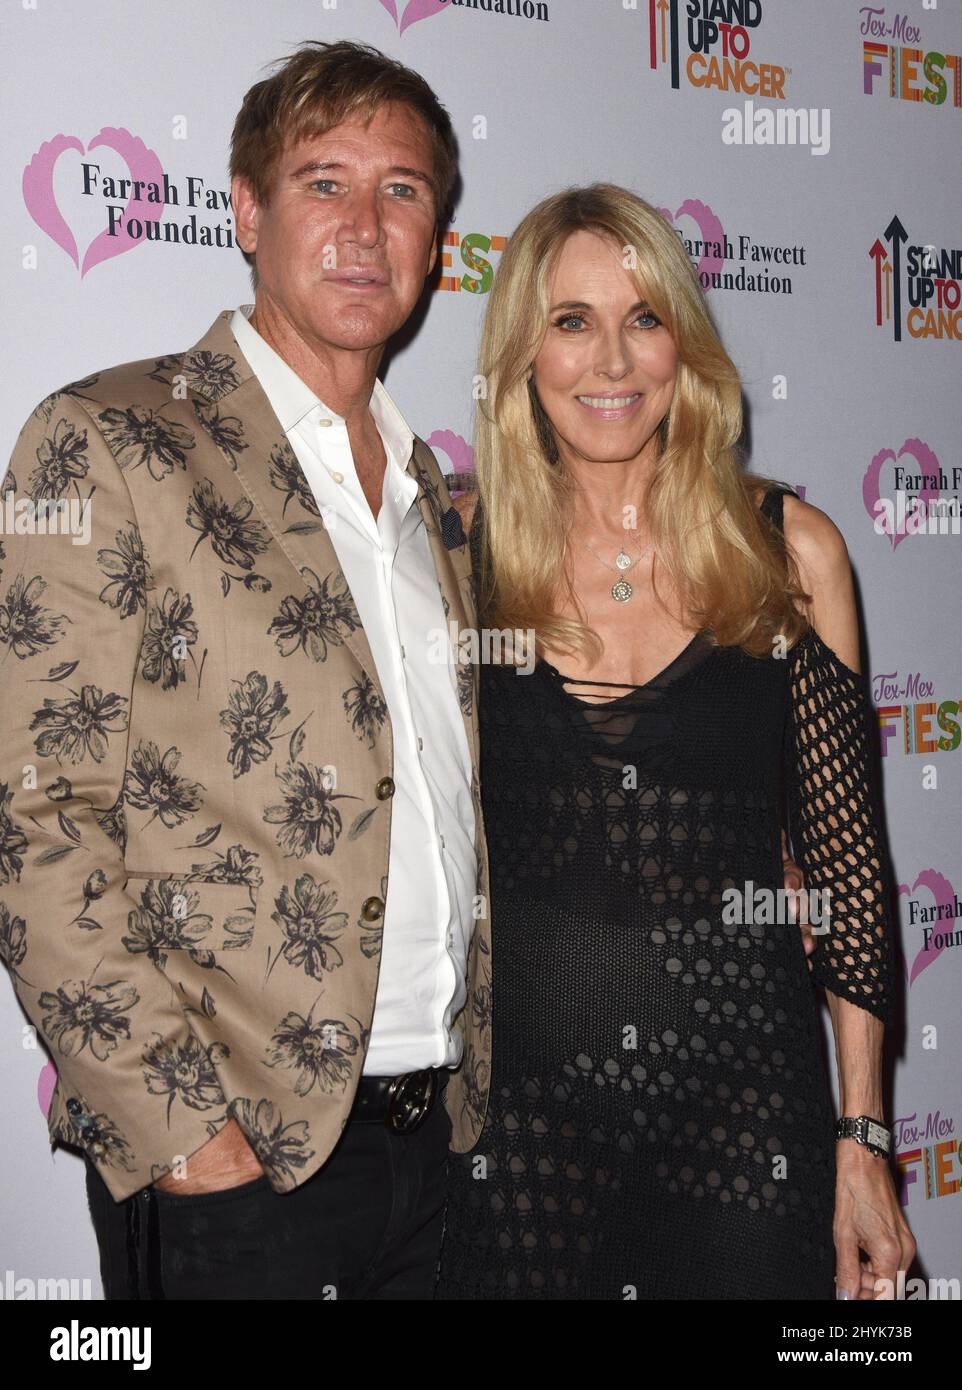 Lawrence Piro and Alana Stewart at The Farrah Fawcett Foundation's Tex-Mex Fiesta held at the Wallis Annenberg Center for the Performing Arts on September 6, 2019 in Beverly Hills, USA. Stock Photo